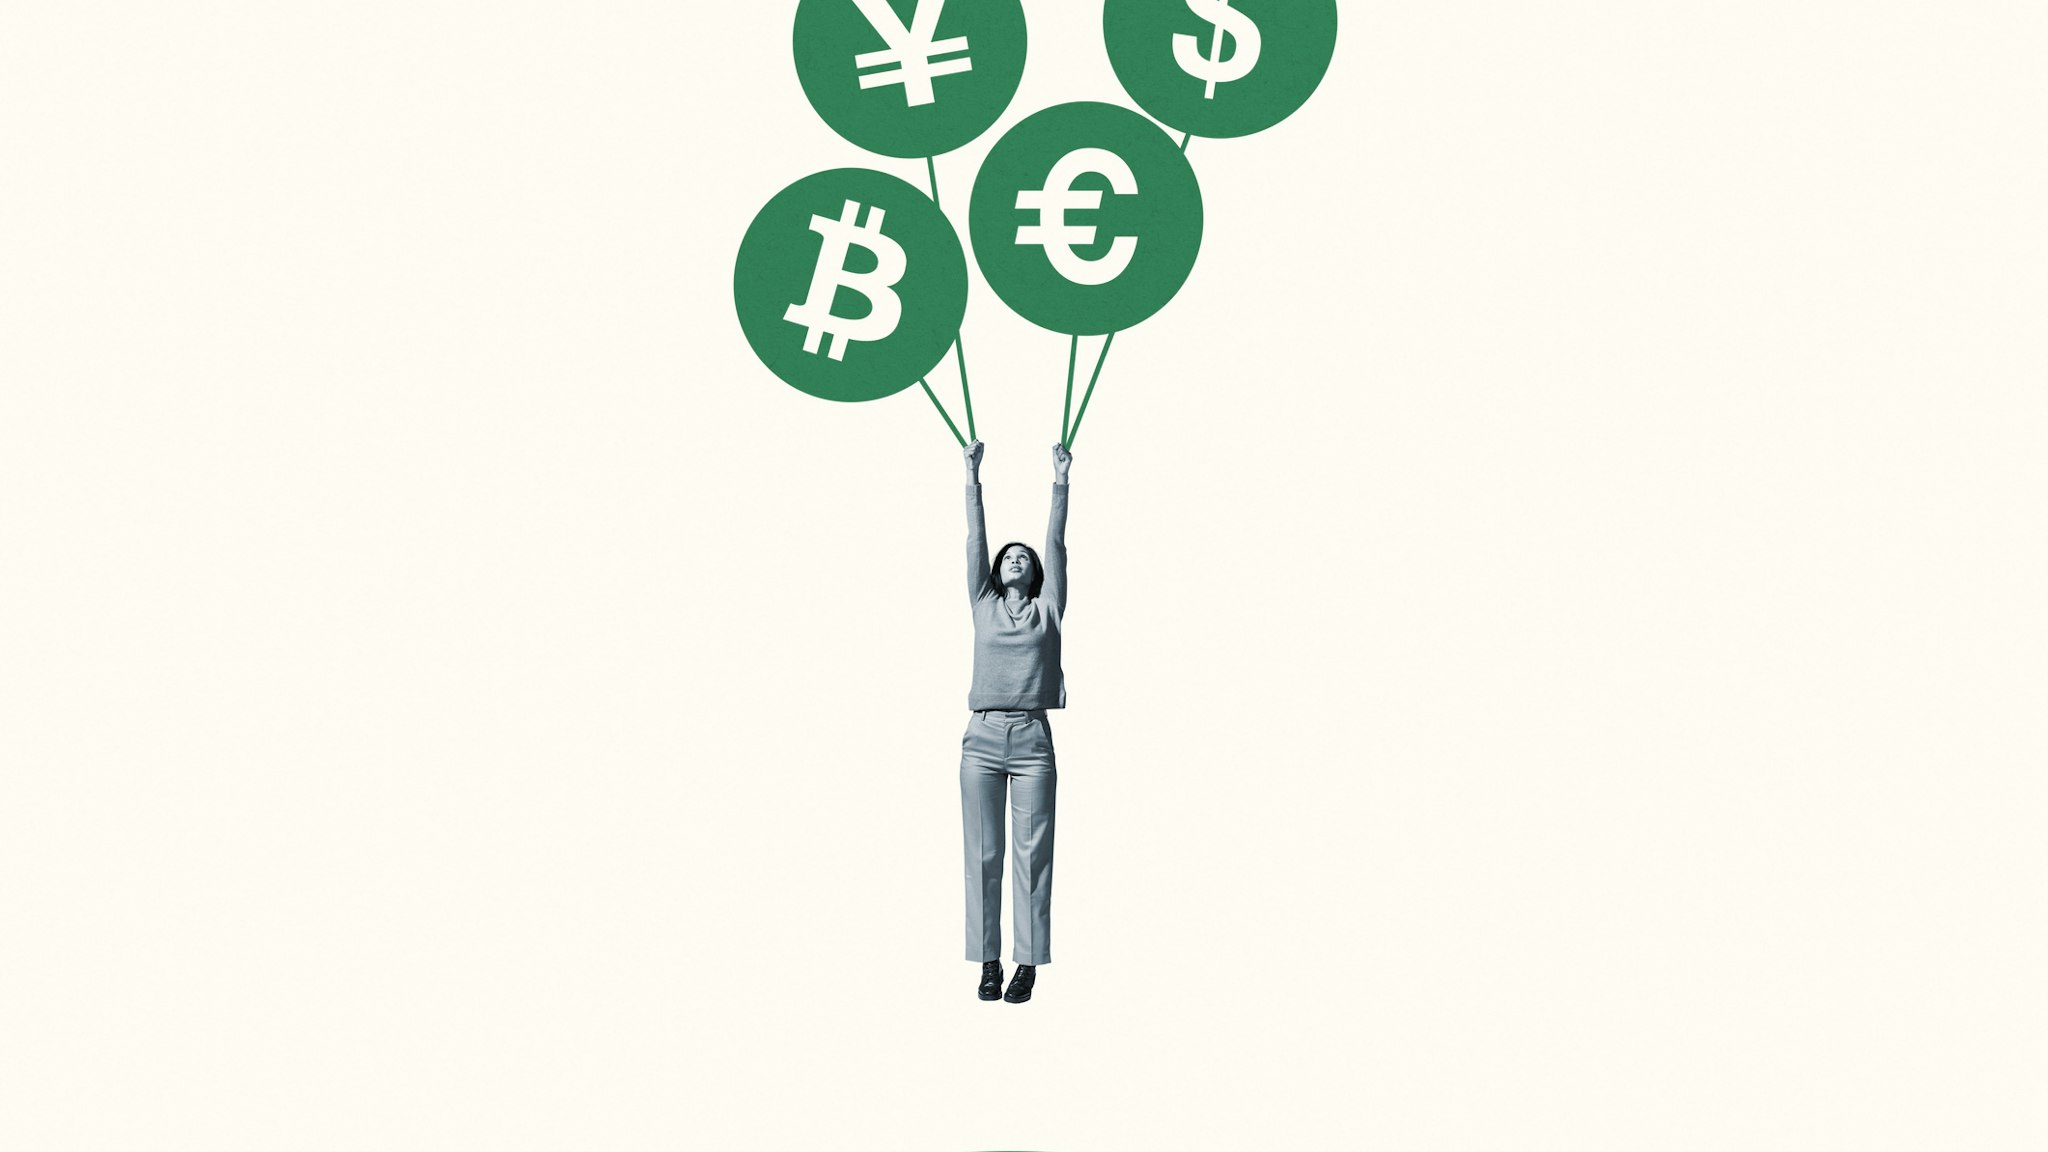 Young woman hanging from large green currency symbol balloons against white background